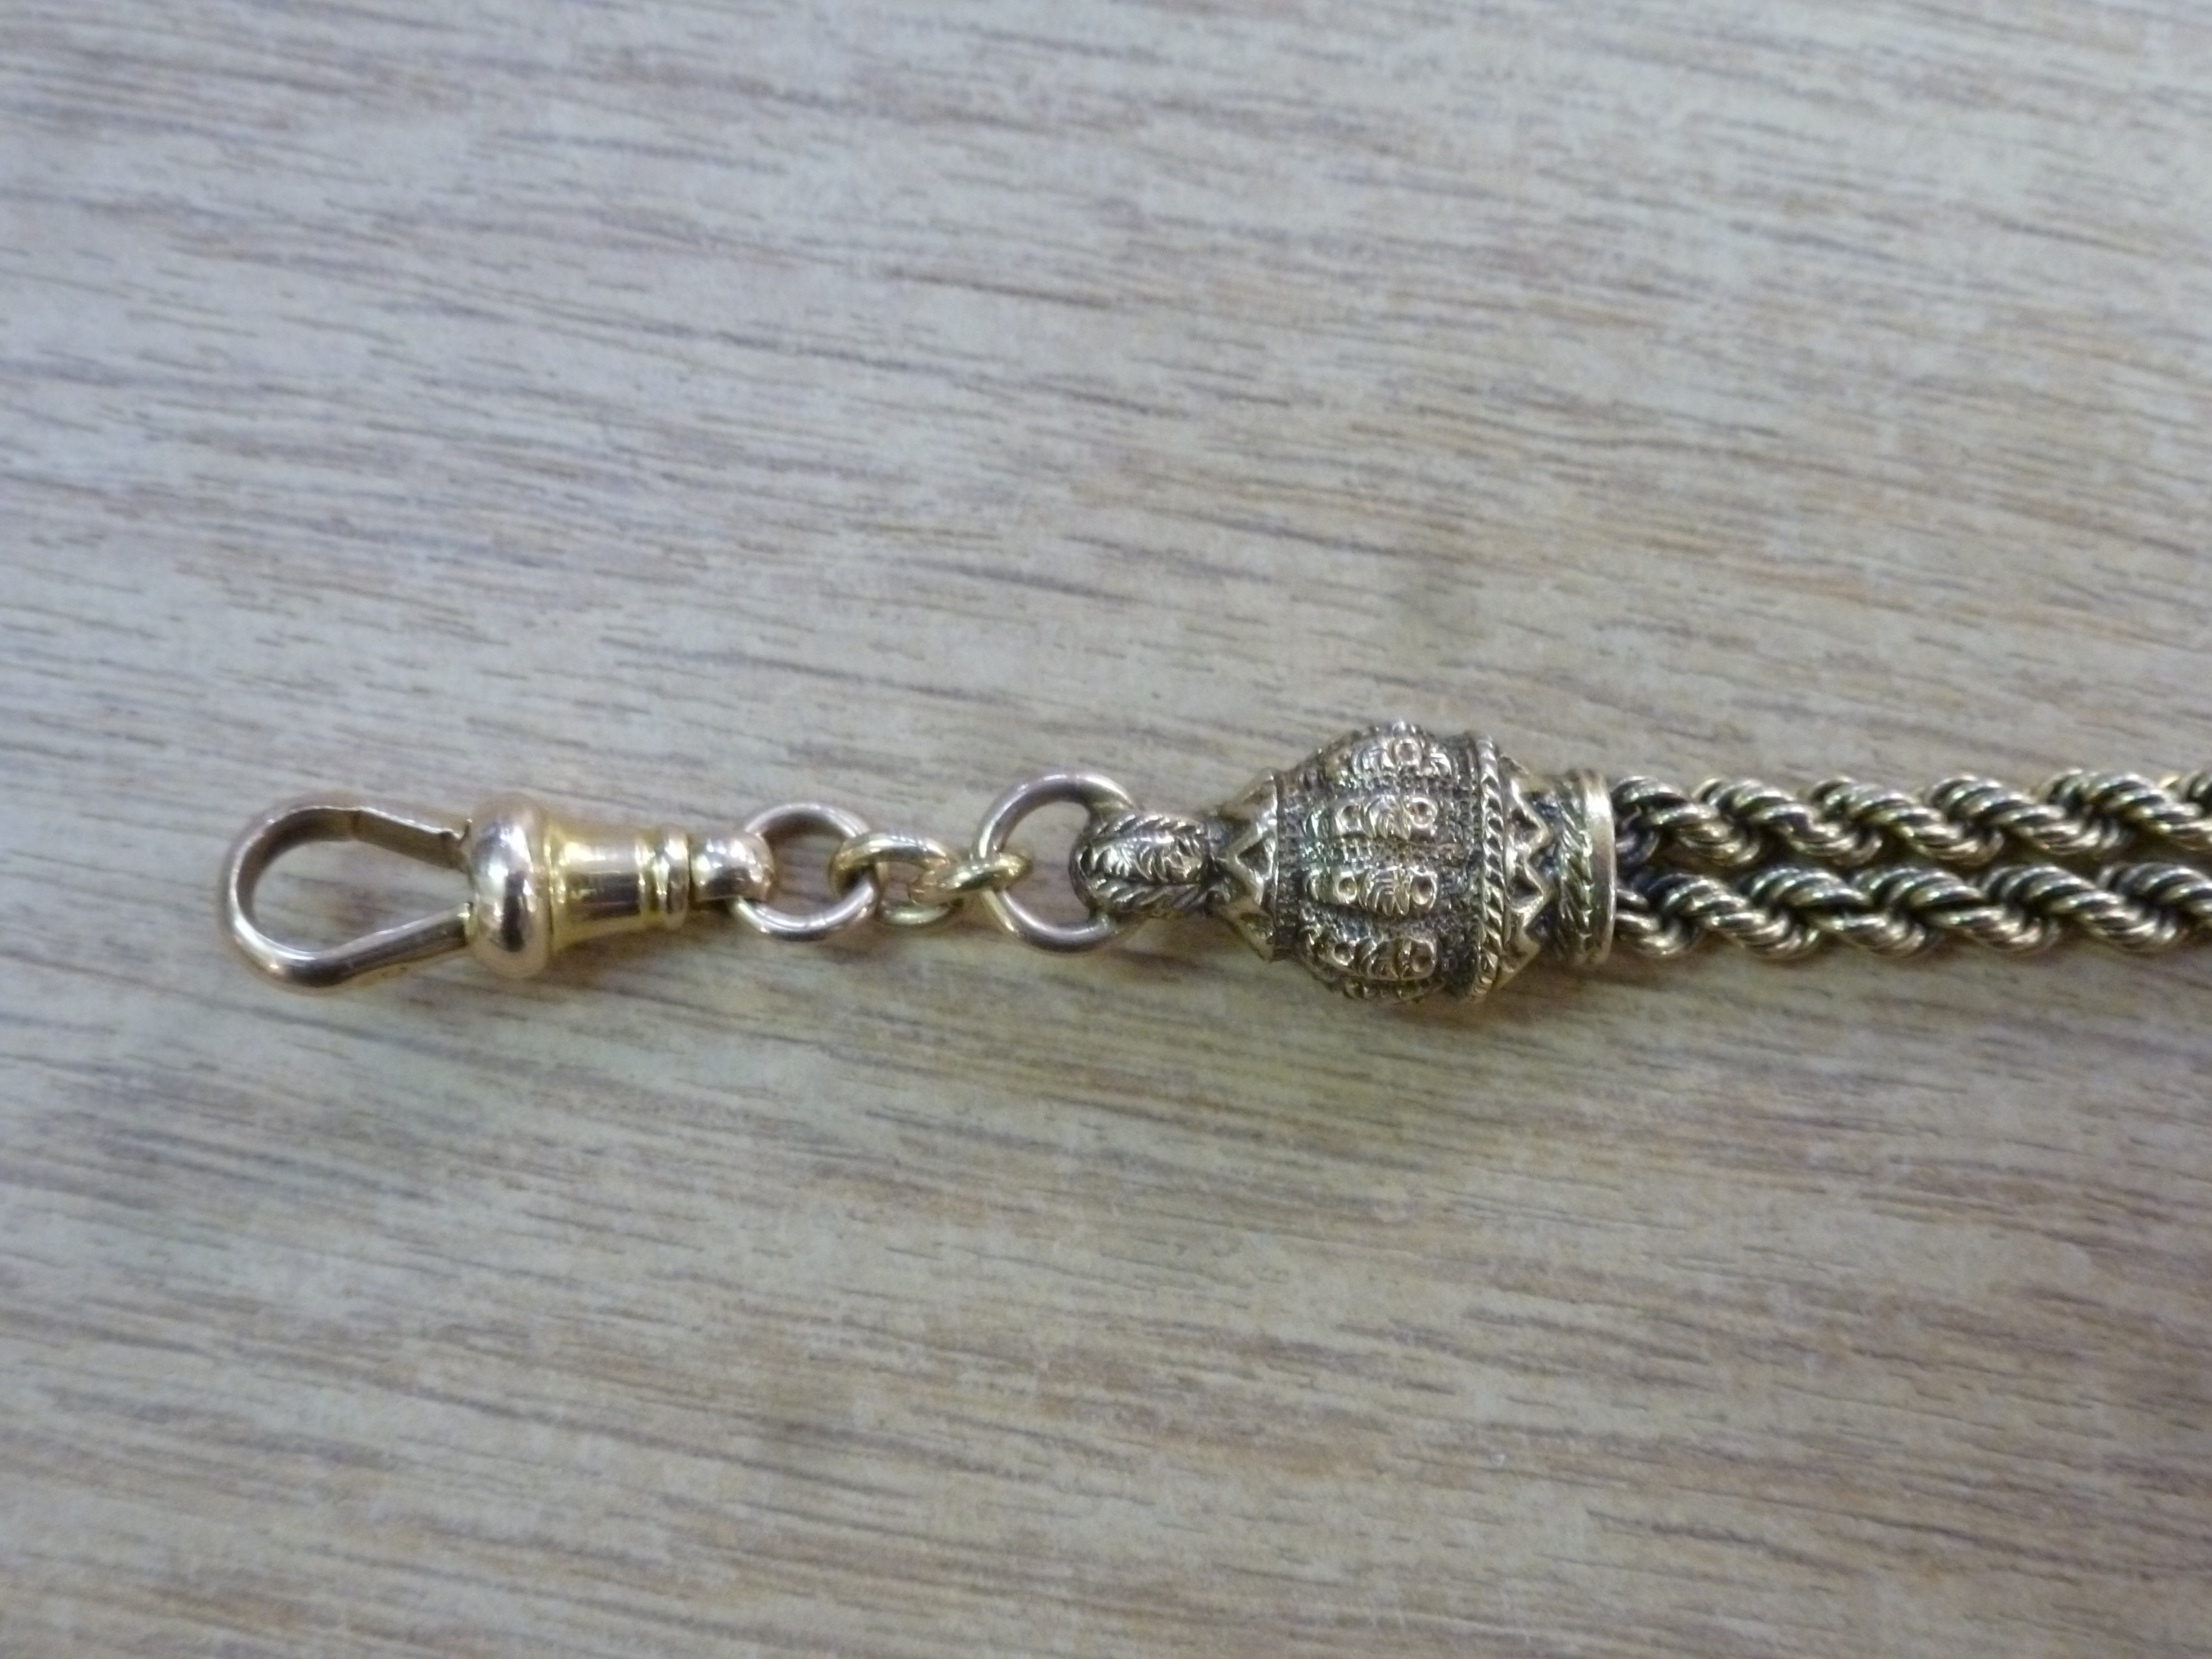 A 9 ct gold short watch or chatelaine ch - Image 4 of 4